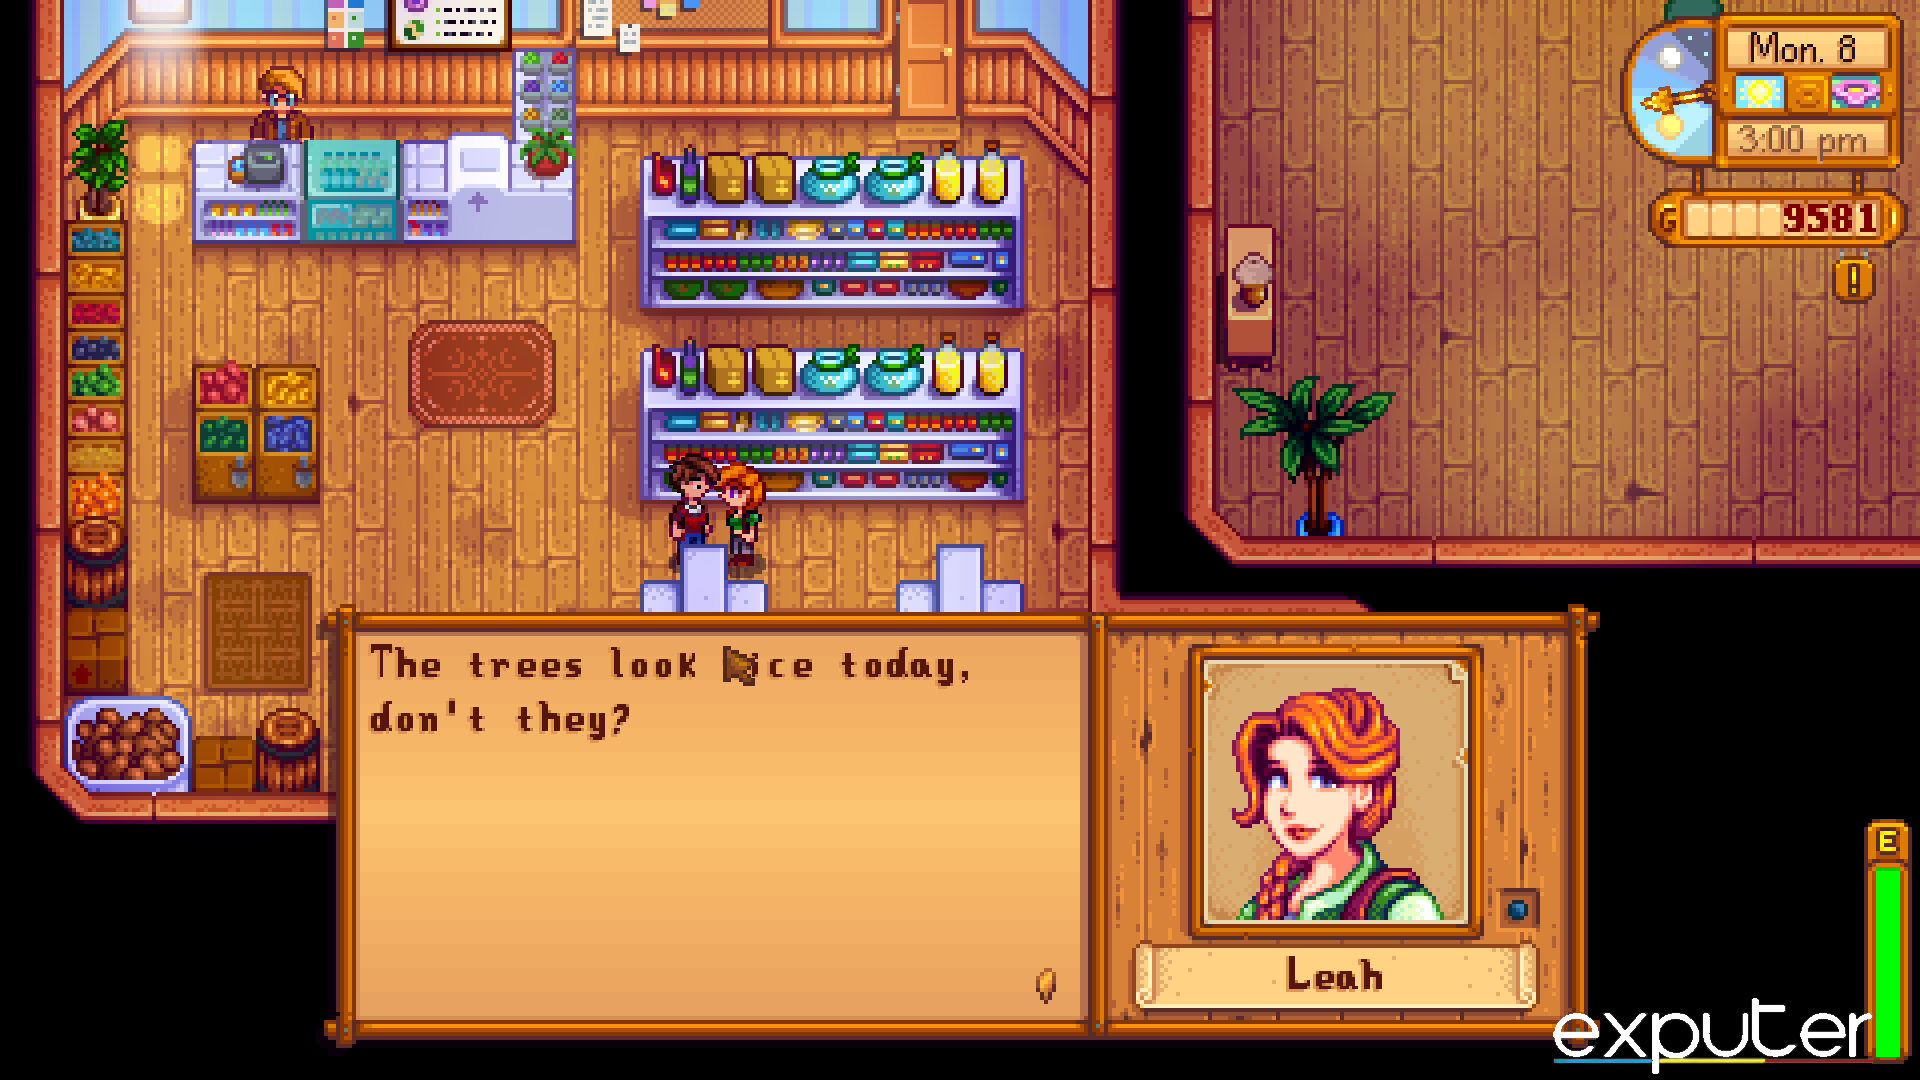 Stardew Valley Leah's Dialogue and Personality